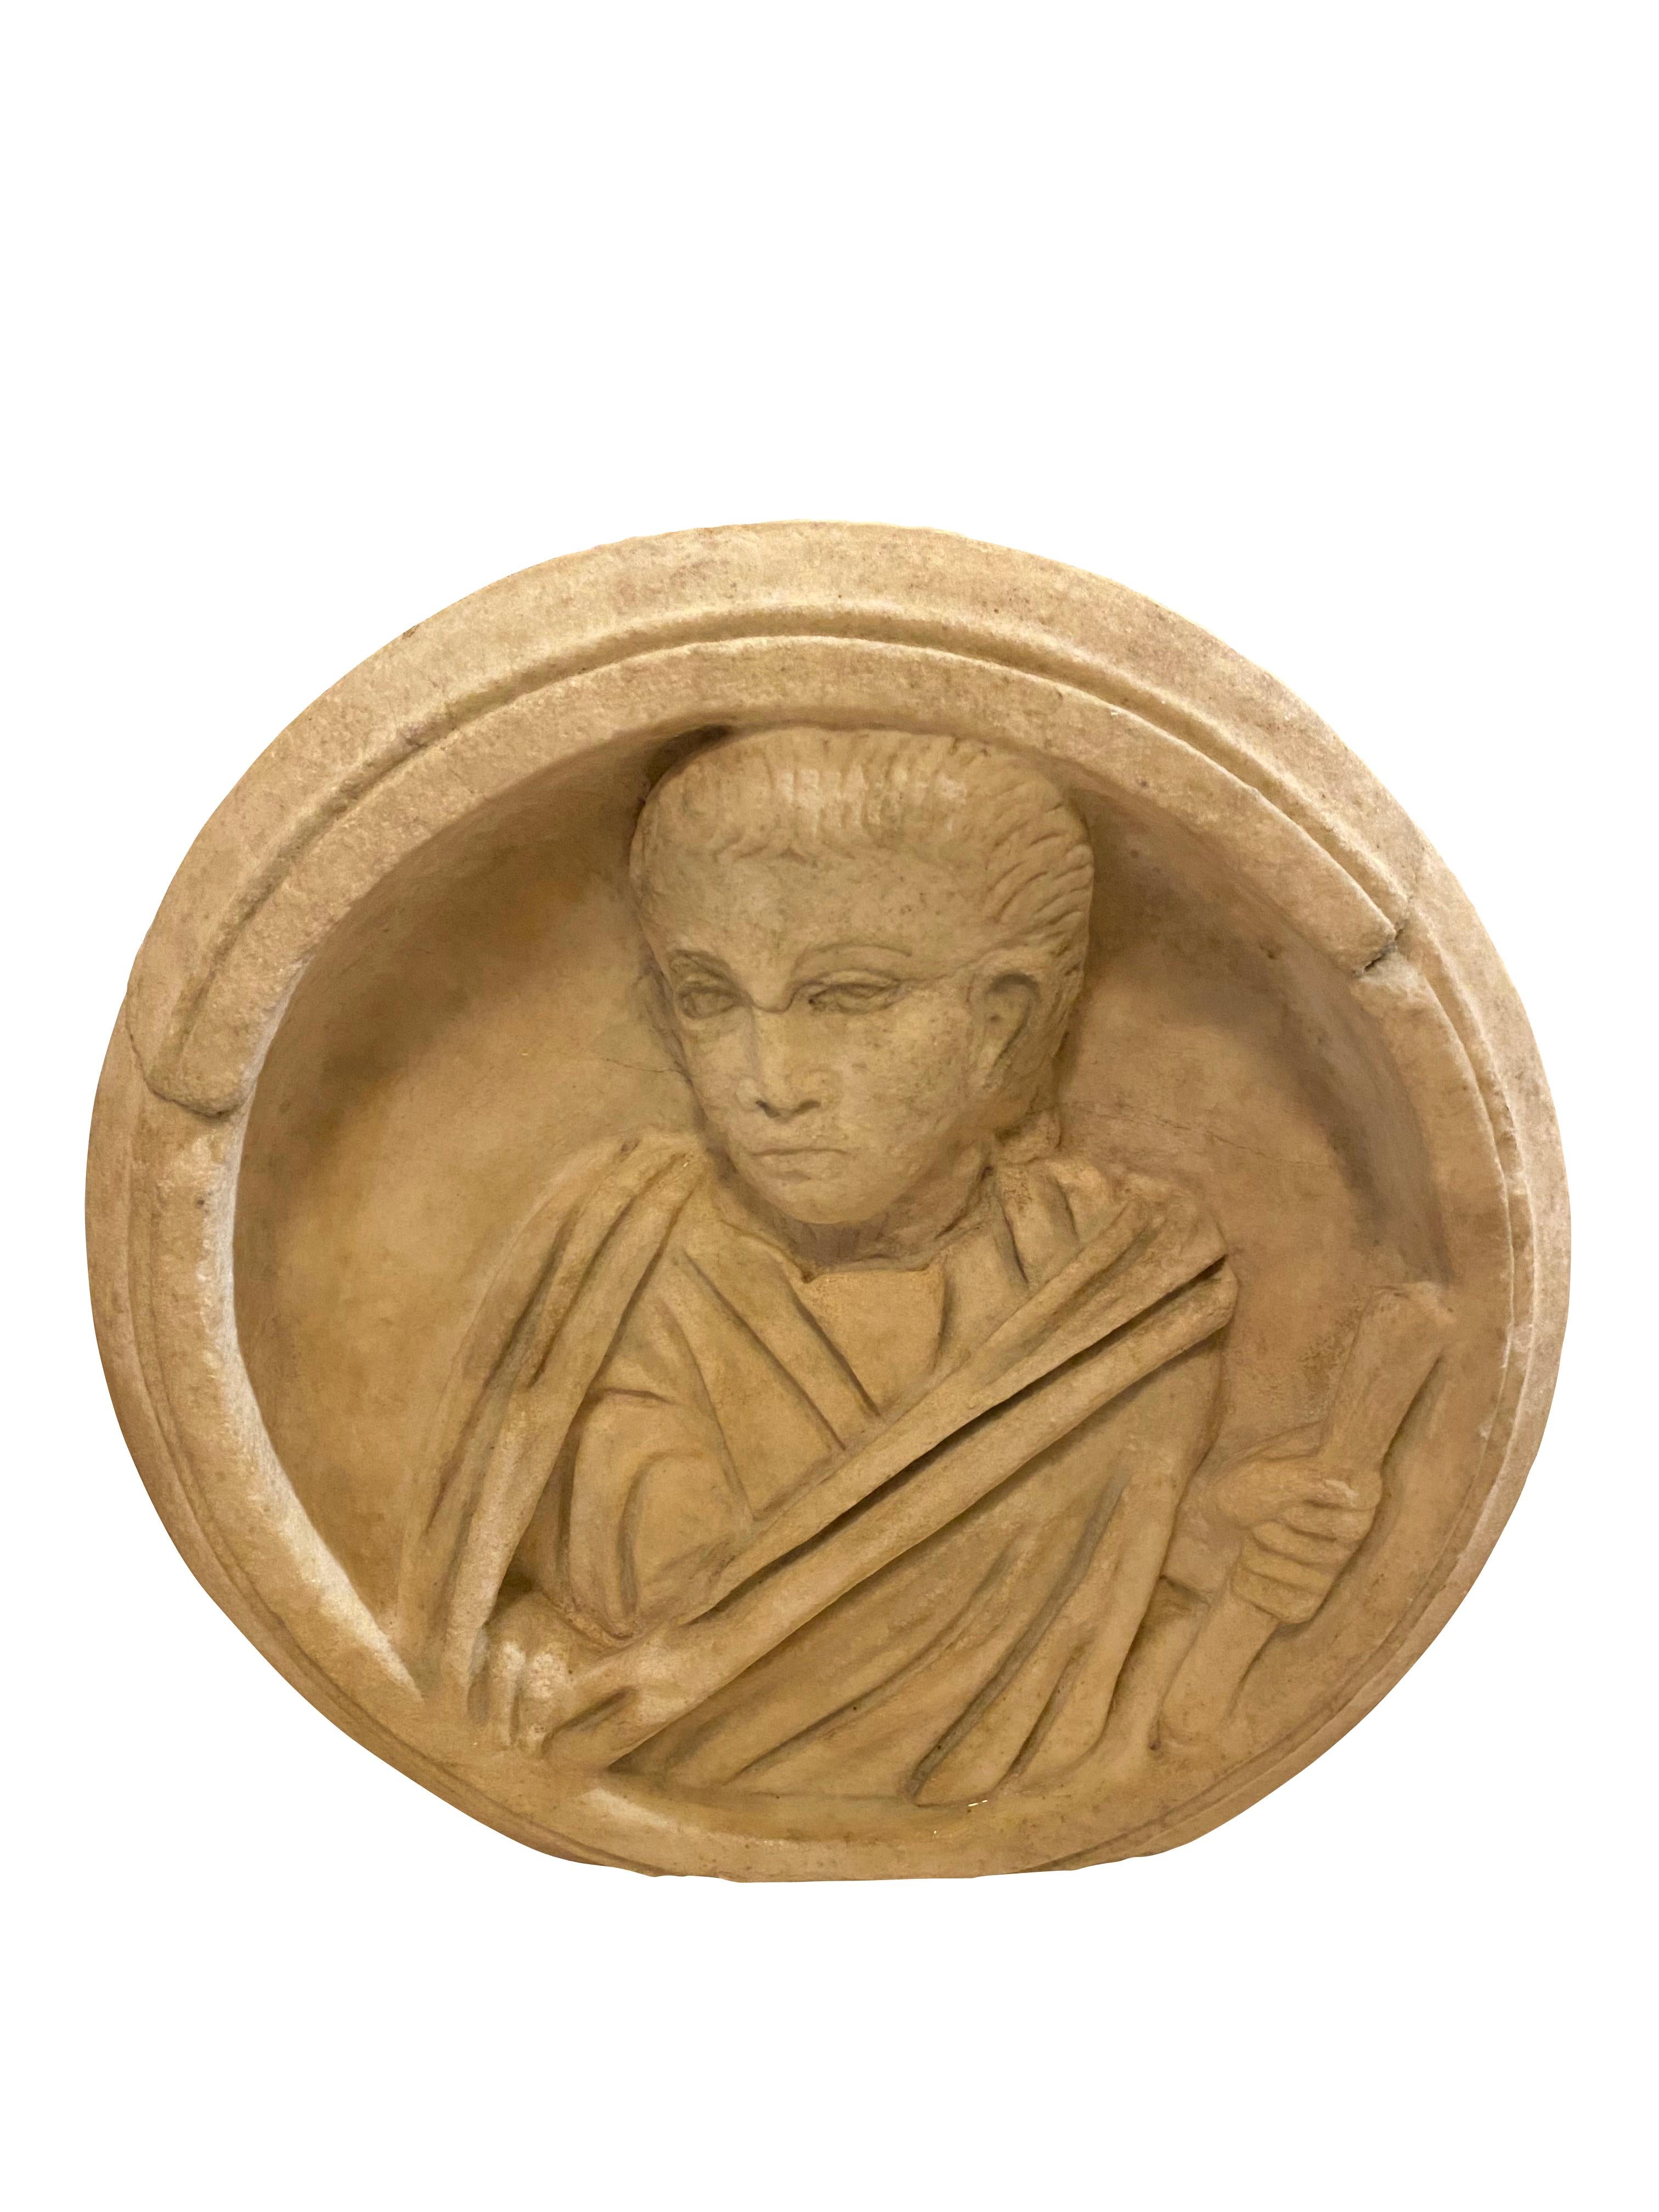 Depicting a robed man holding a scroll in a circular frame. Purchased in Southern California.